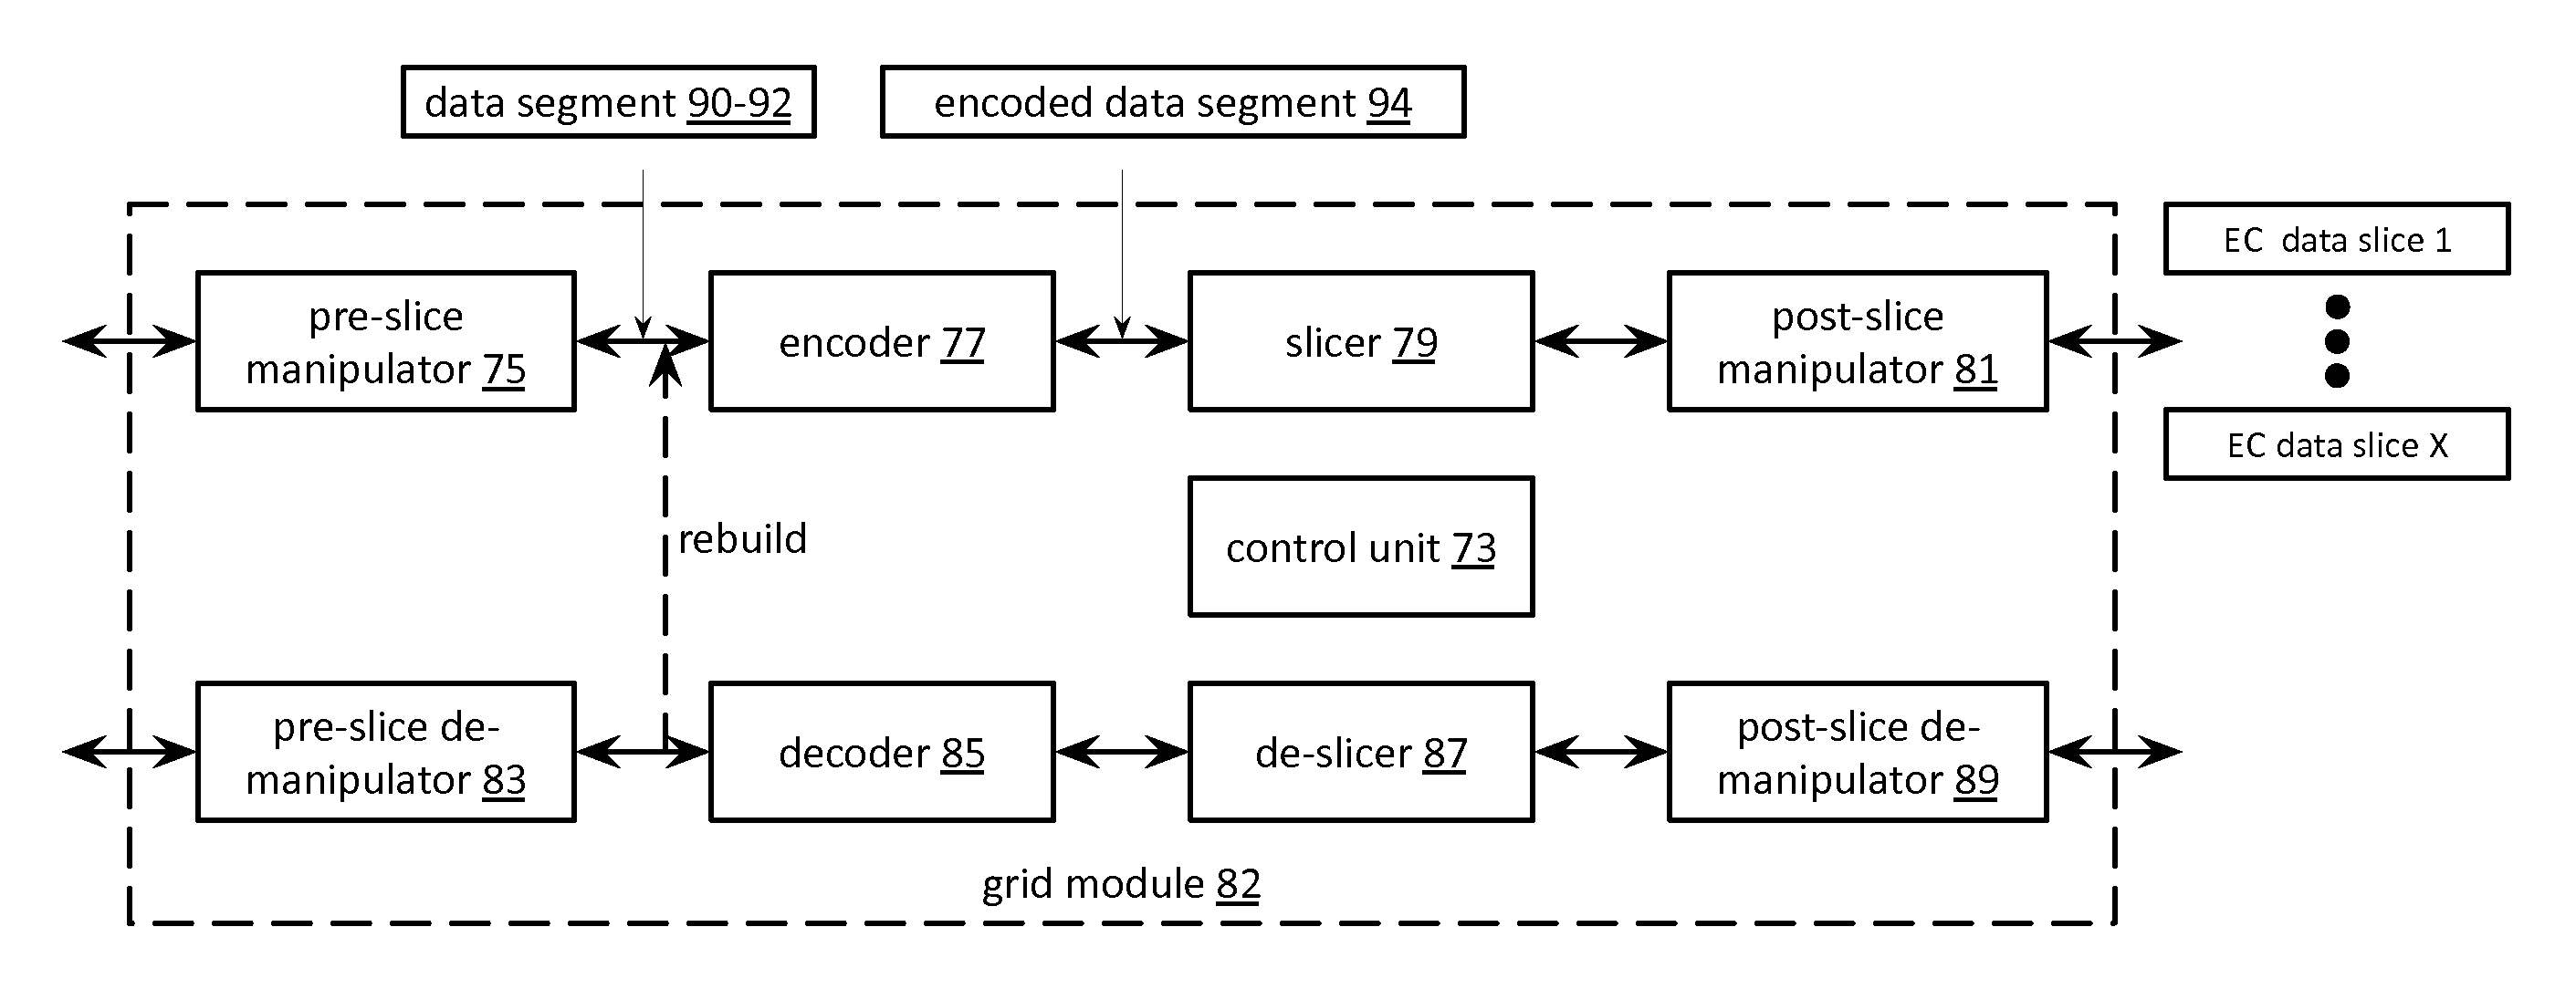 Identifying an error cause within a dispersed storage network